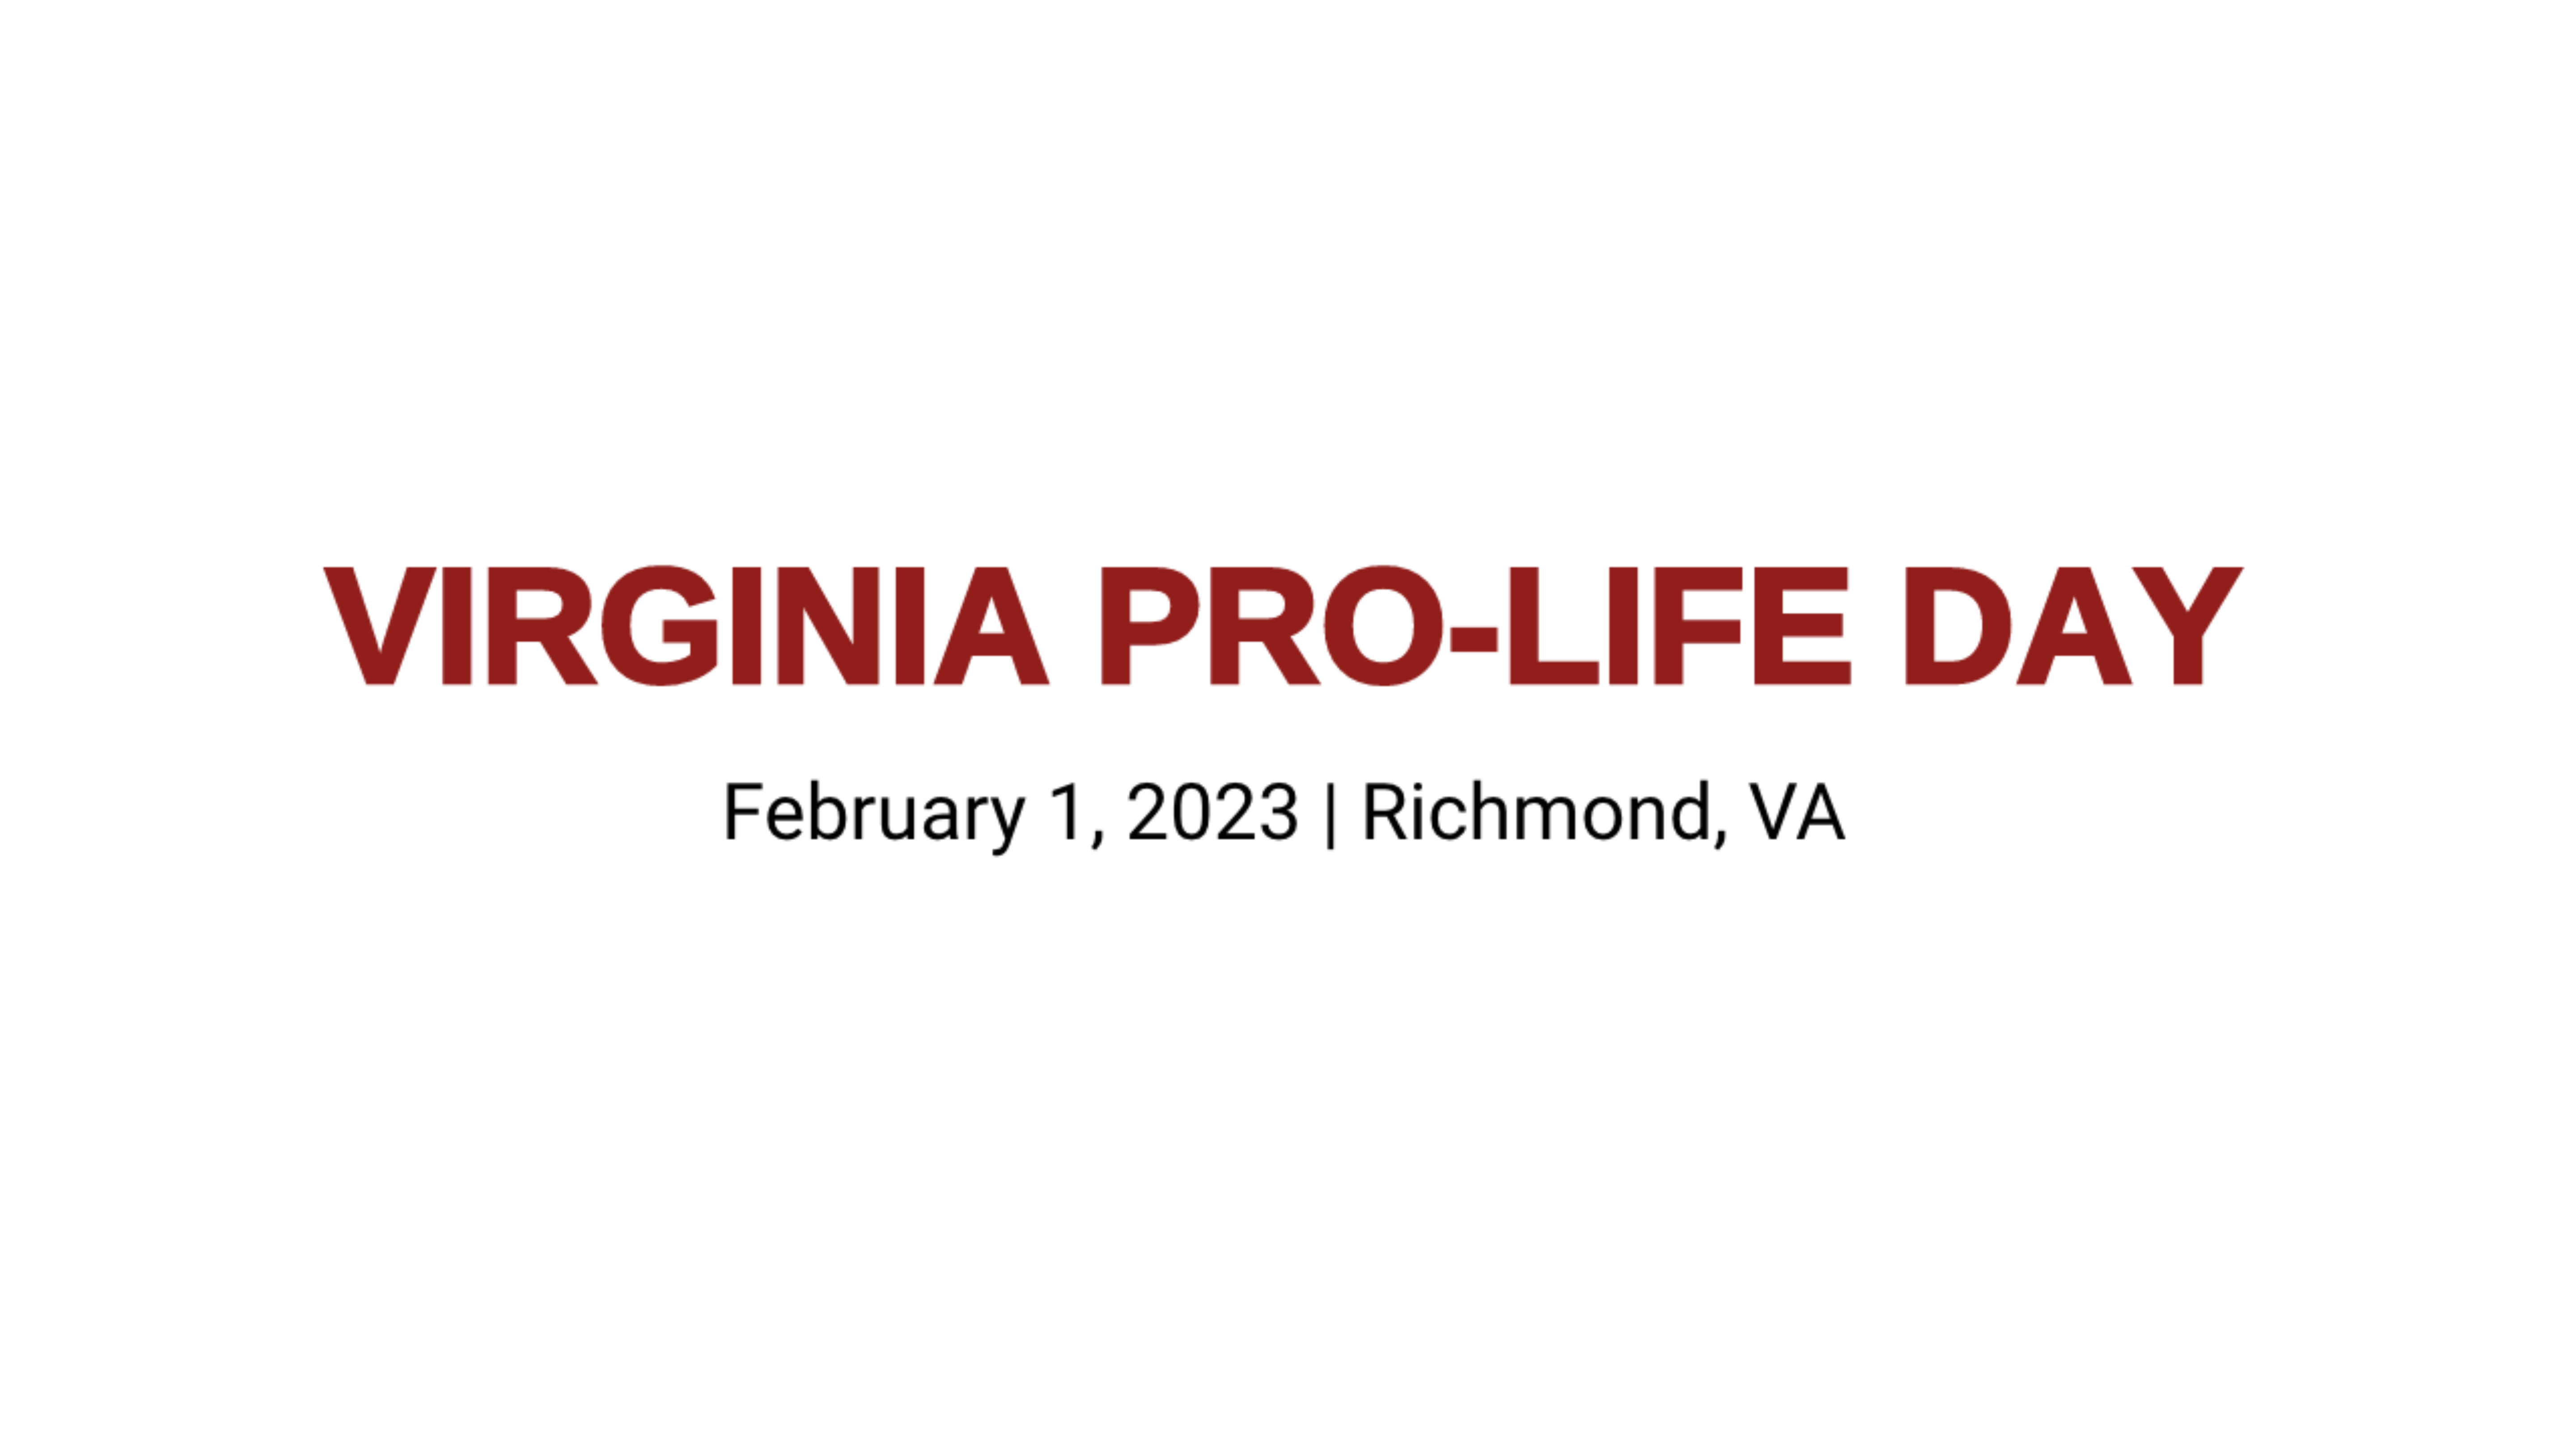 Join Us to Attend Virginia ProLife Day on February 1, 2023 in Richmond